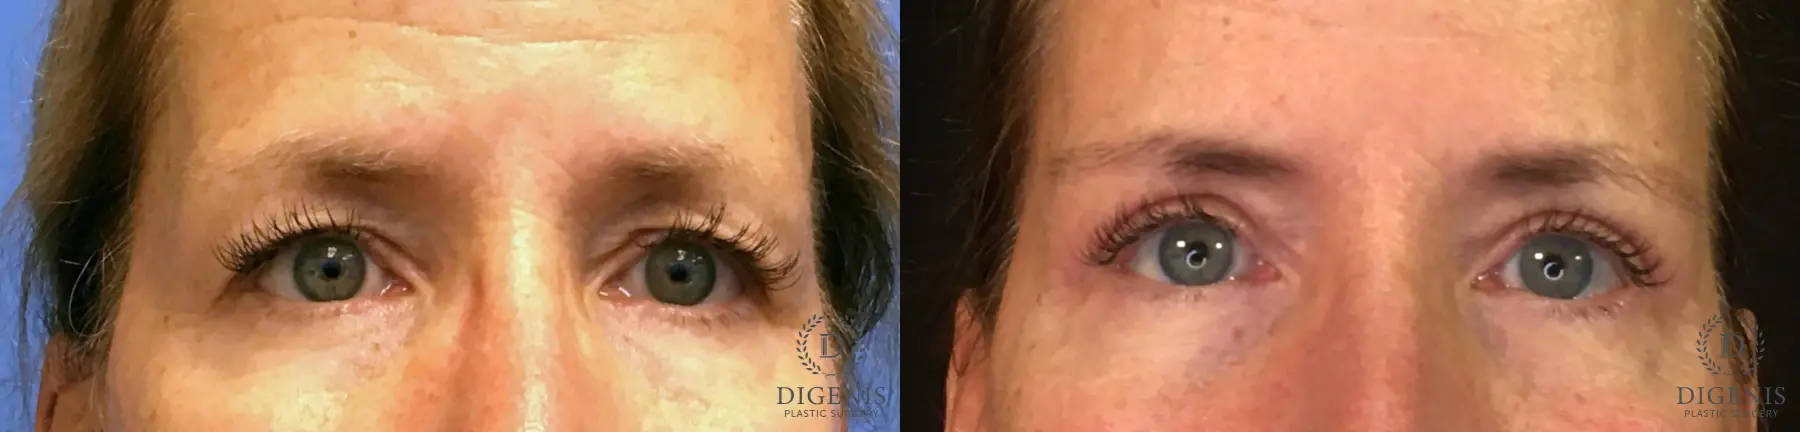 Eyelid Surgery: Patient 2 - Before and After 1